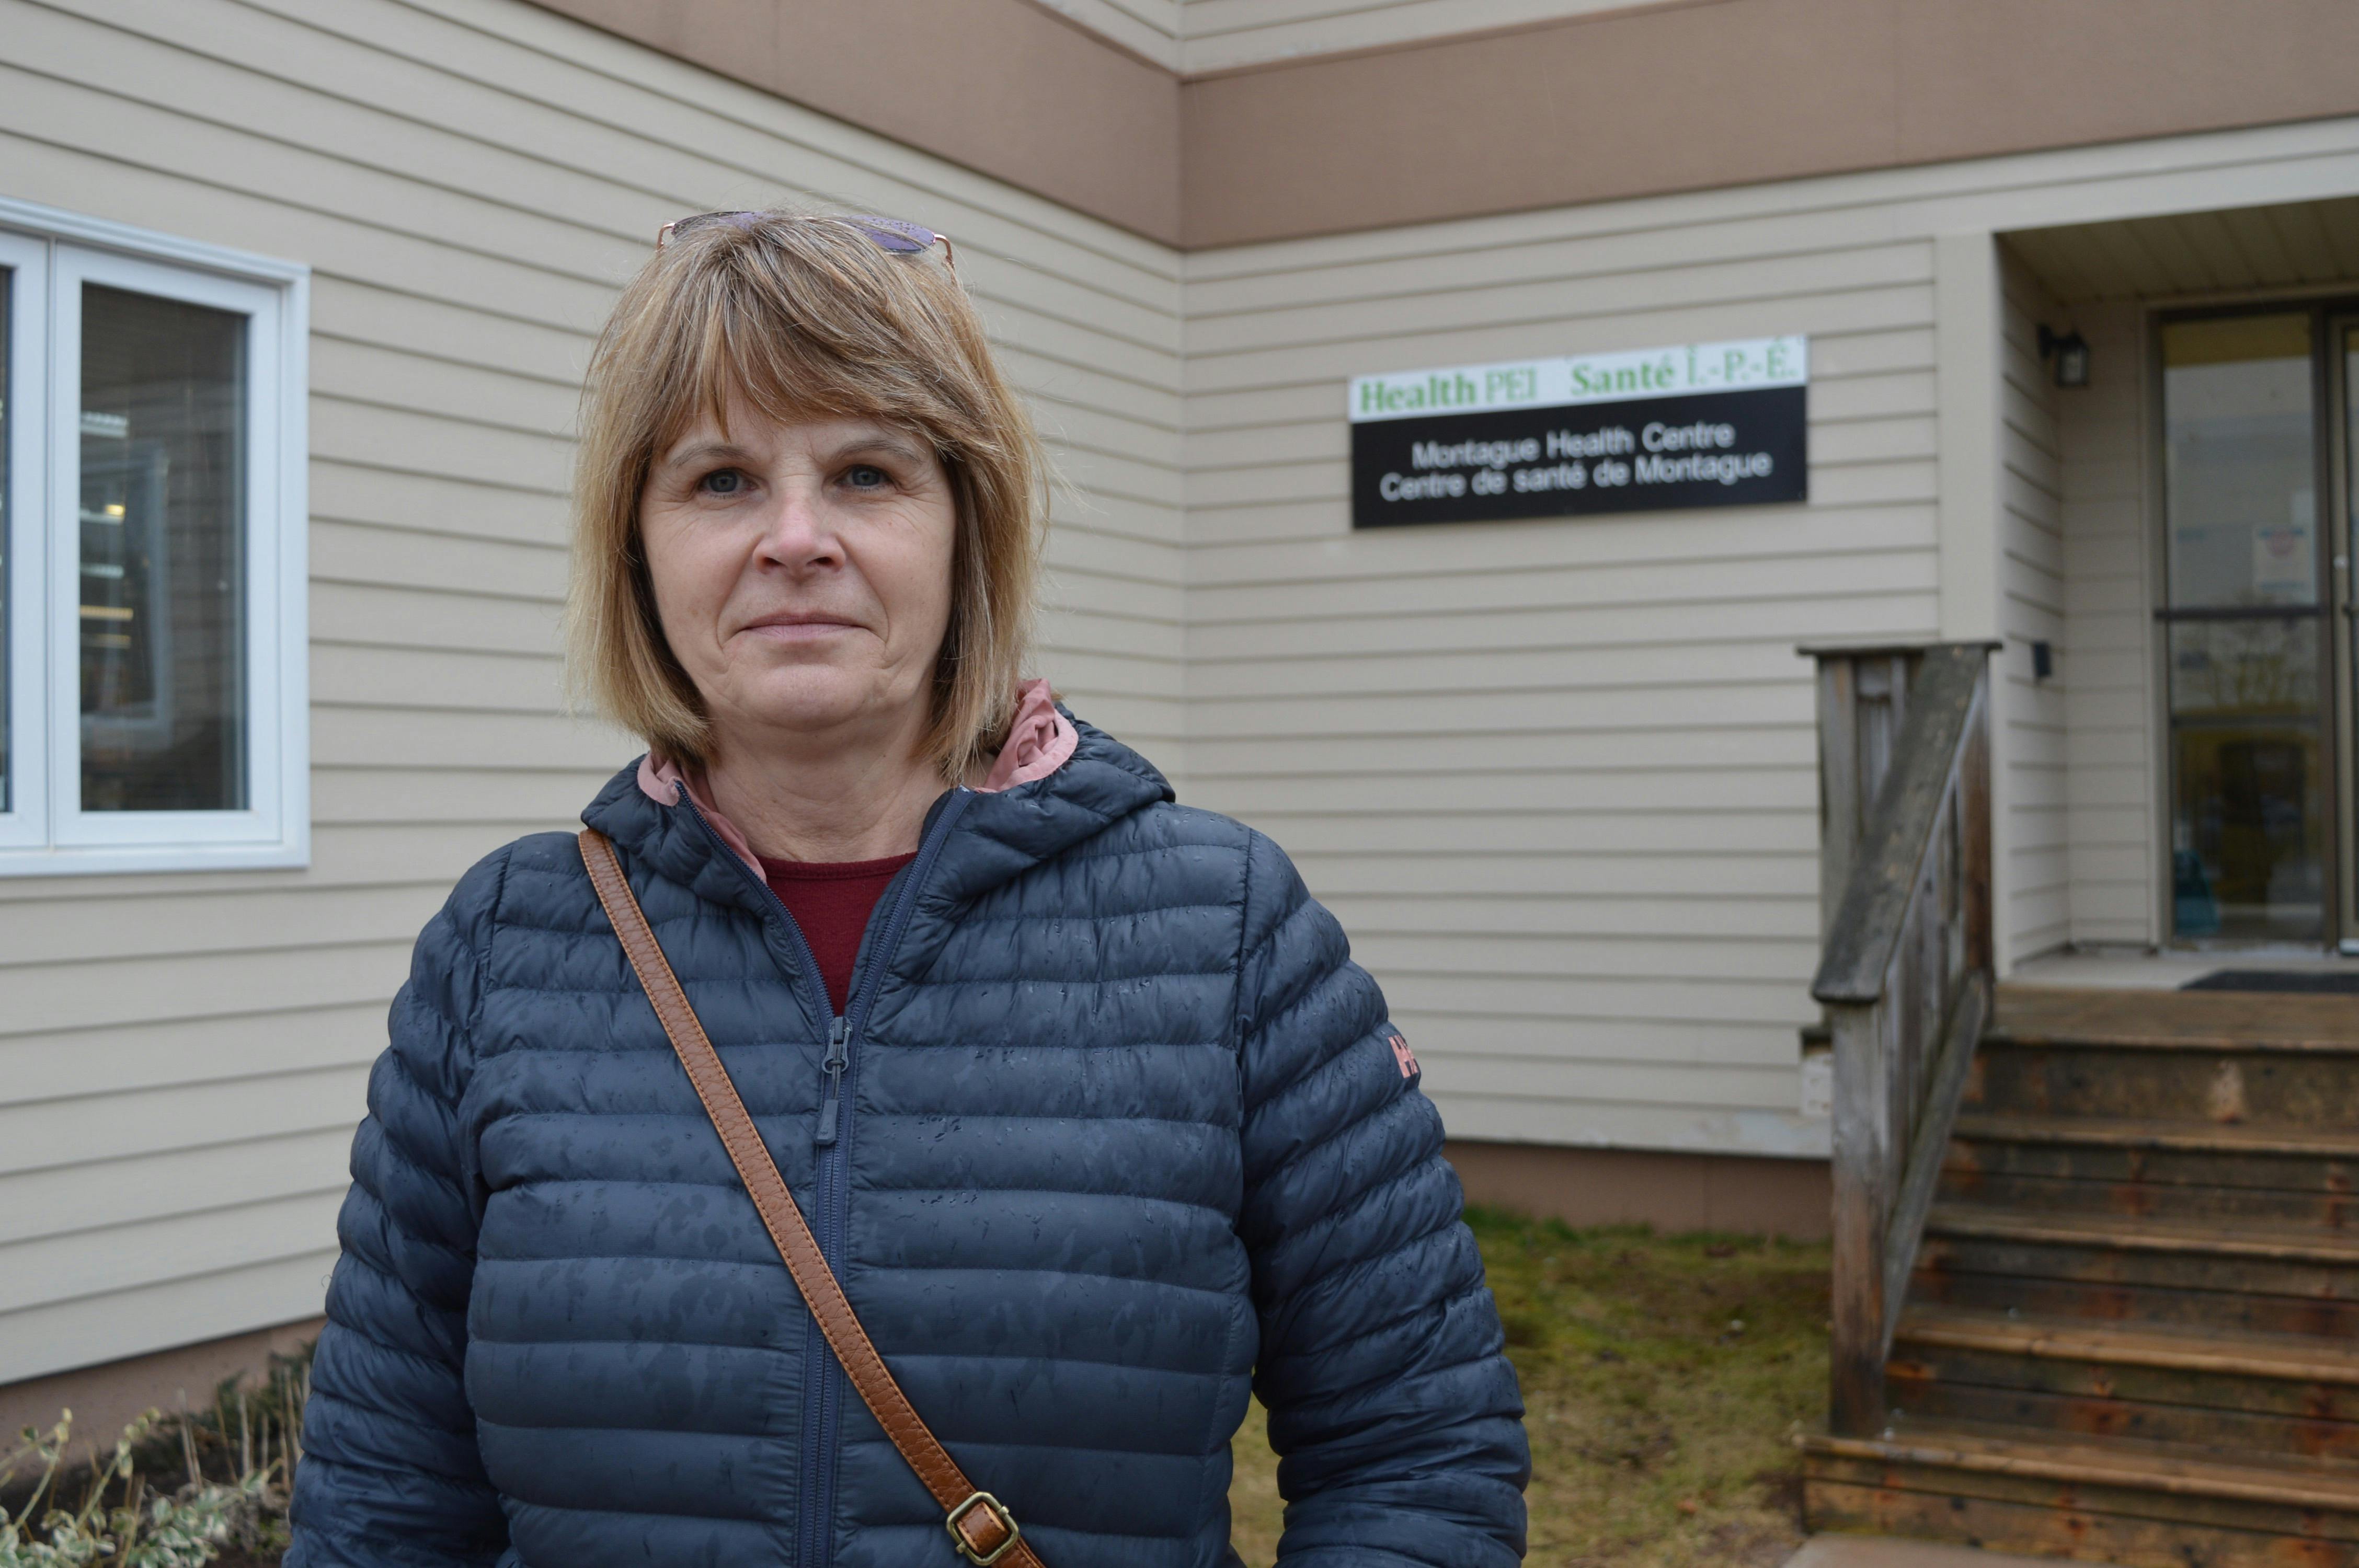 It's just getting ridiculous': Montague, P.E.I. residents angry